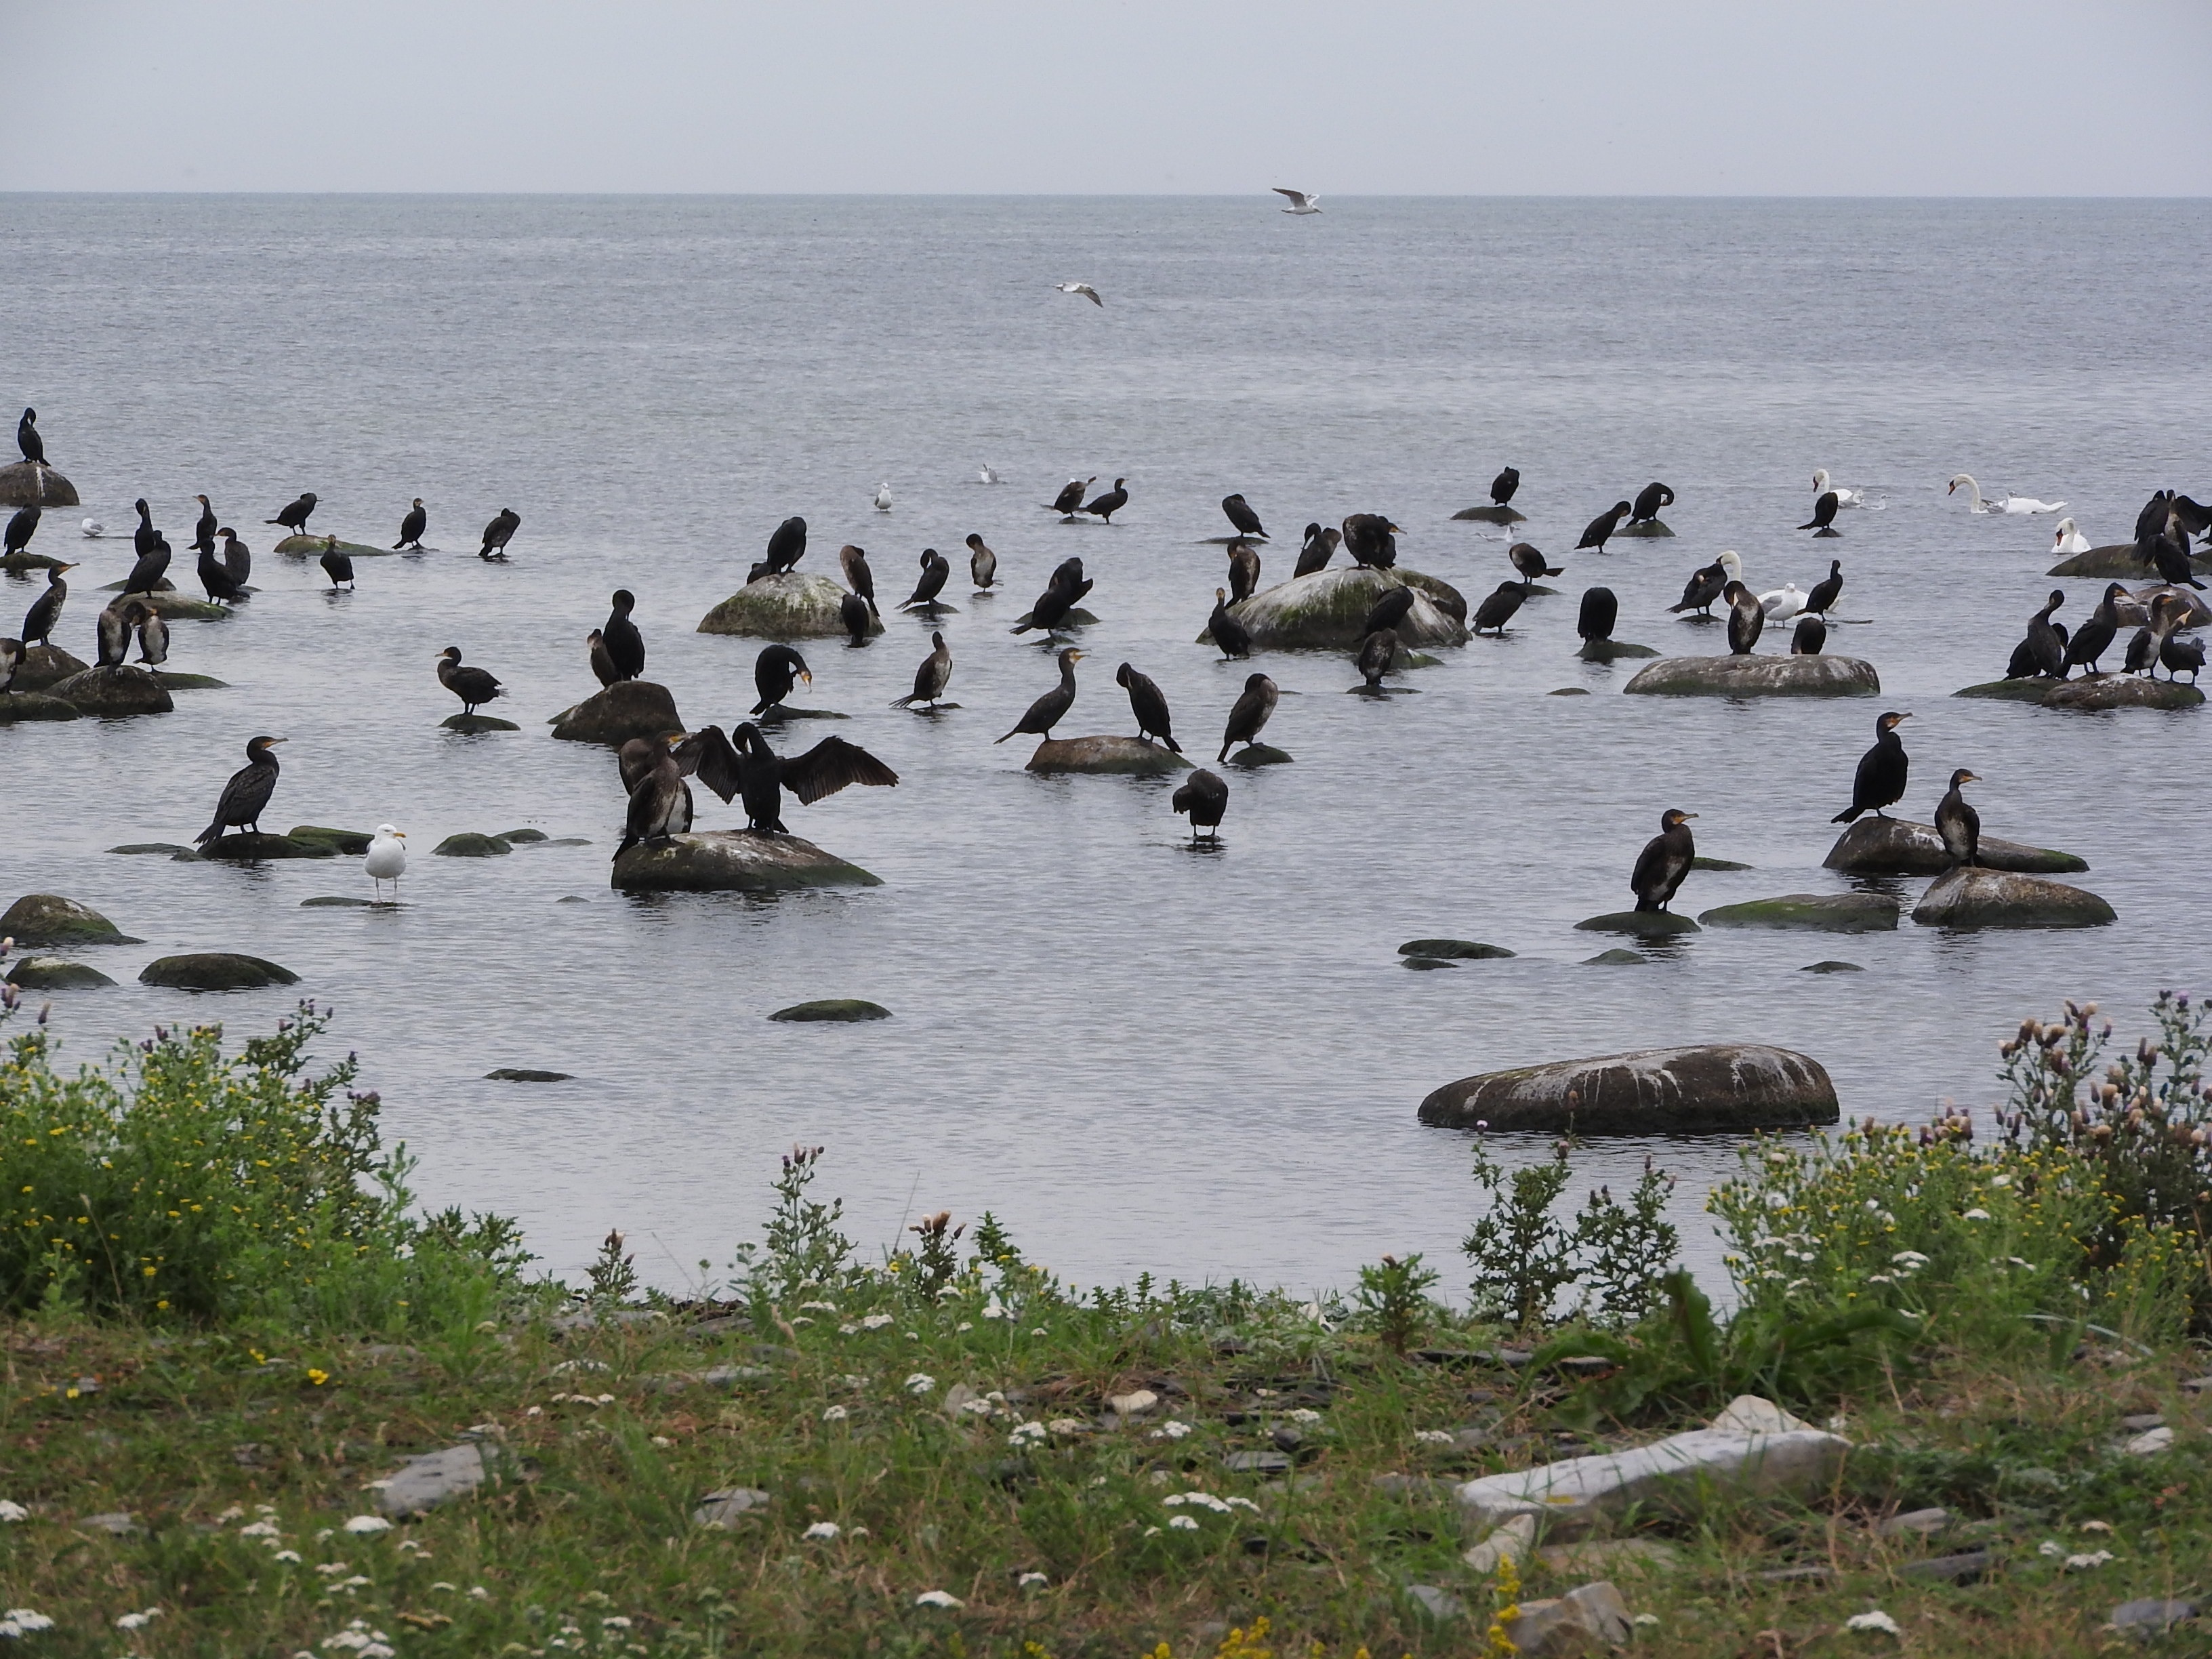 black birds on rock formation  on body of water